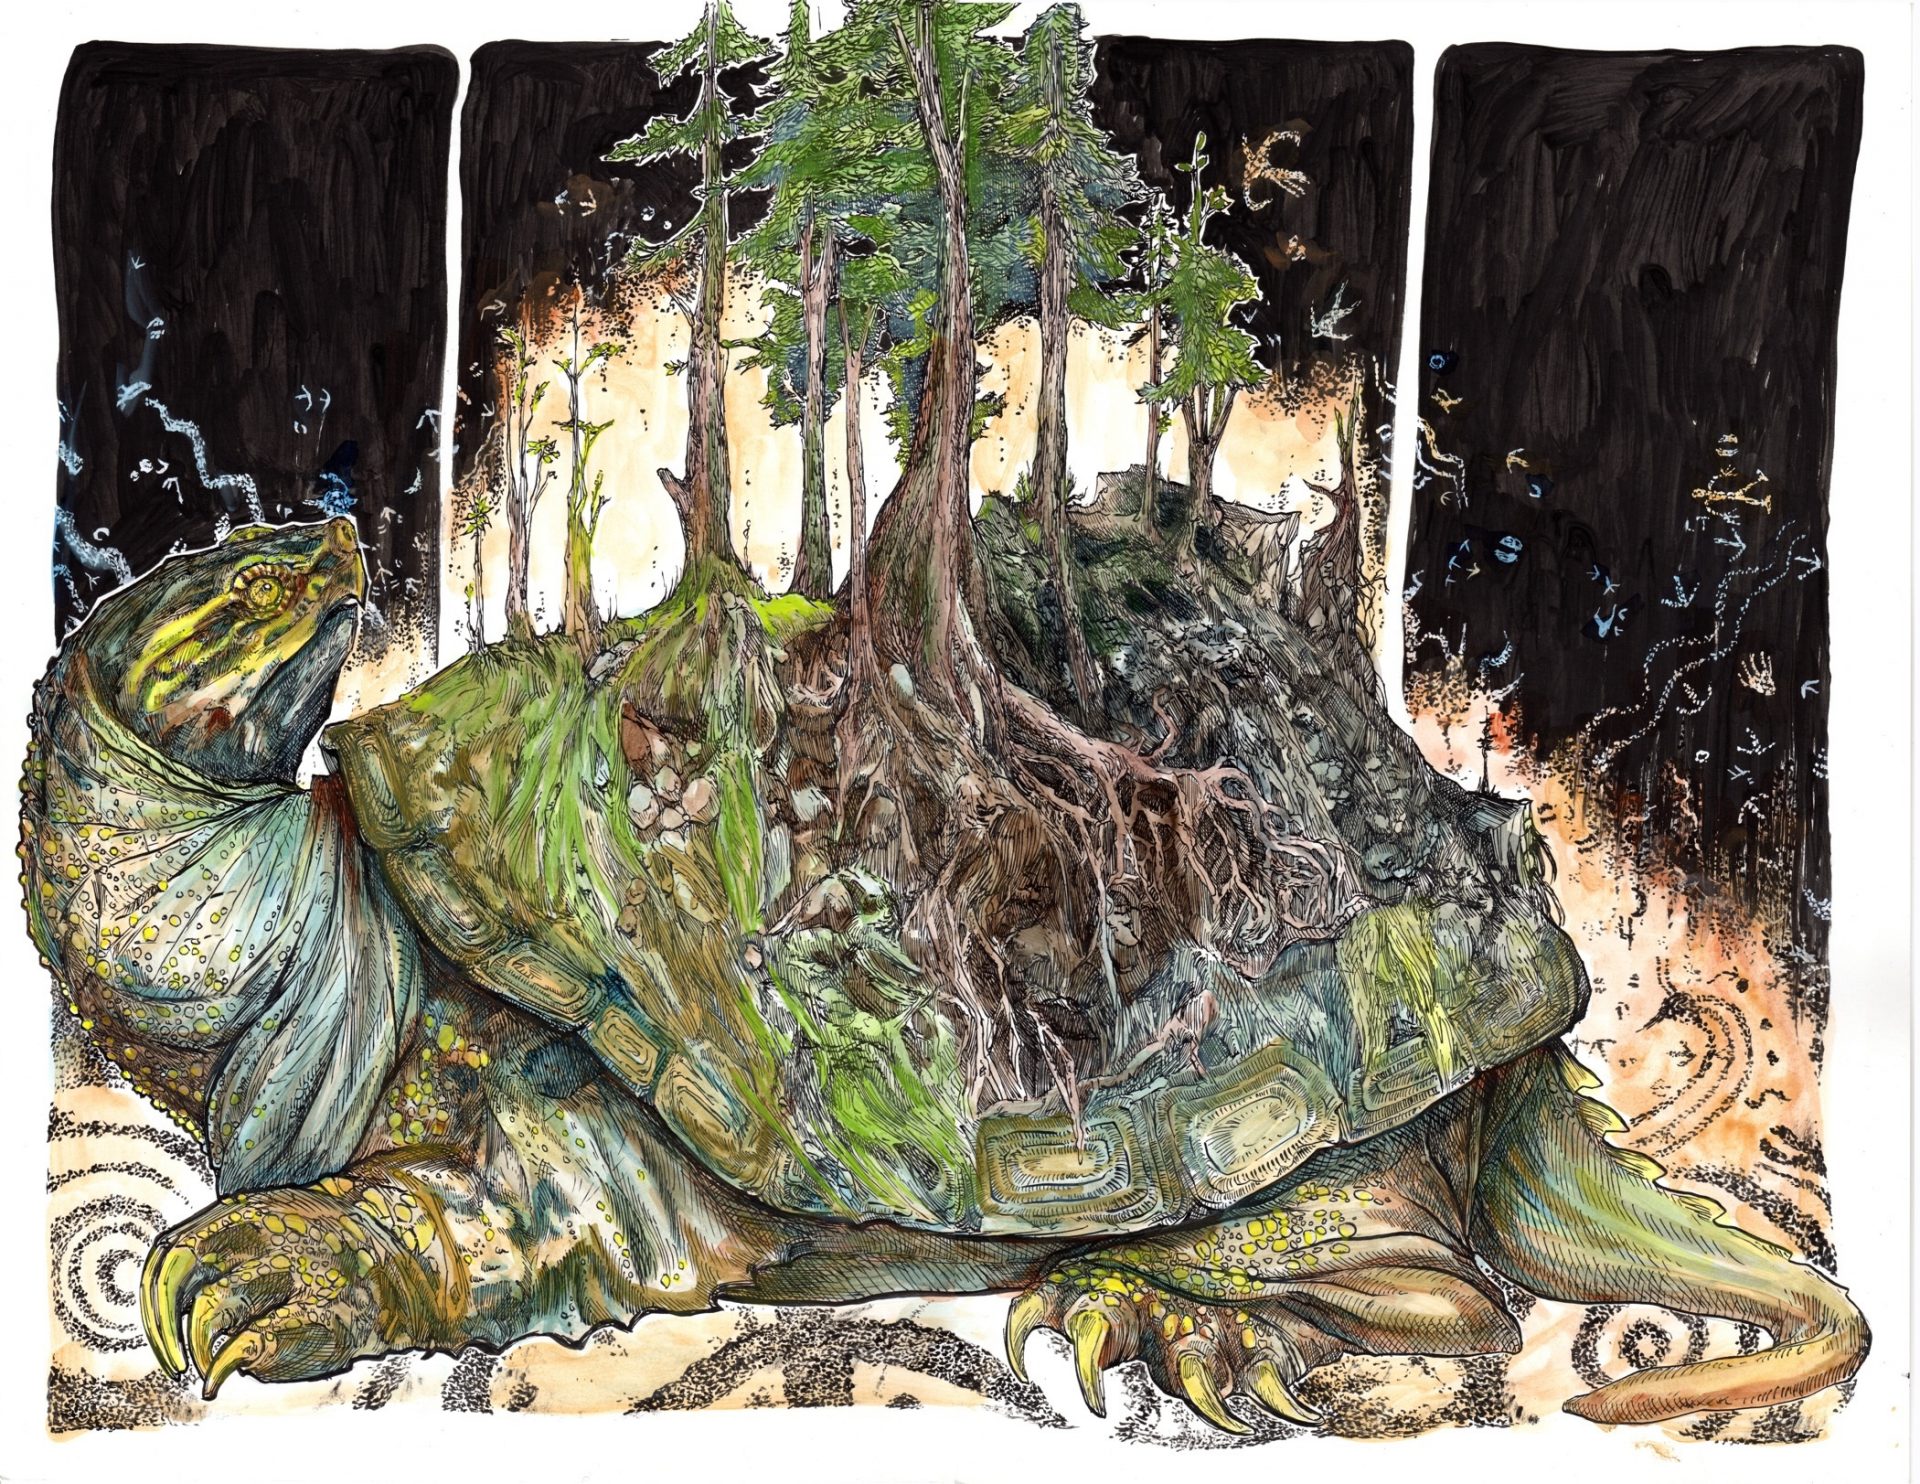 The graphic novel "Ghost River" opens with a Native American origin story, depicting how the Earth first formed on the back of a turtle who rose to the surface of the water to warm himself in the sun. 